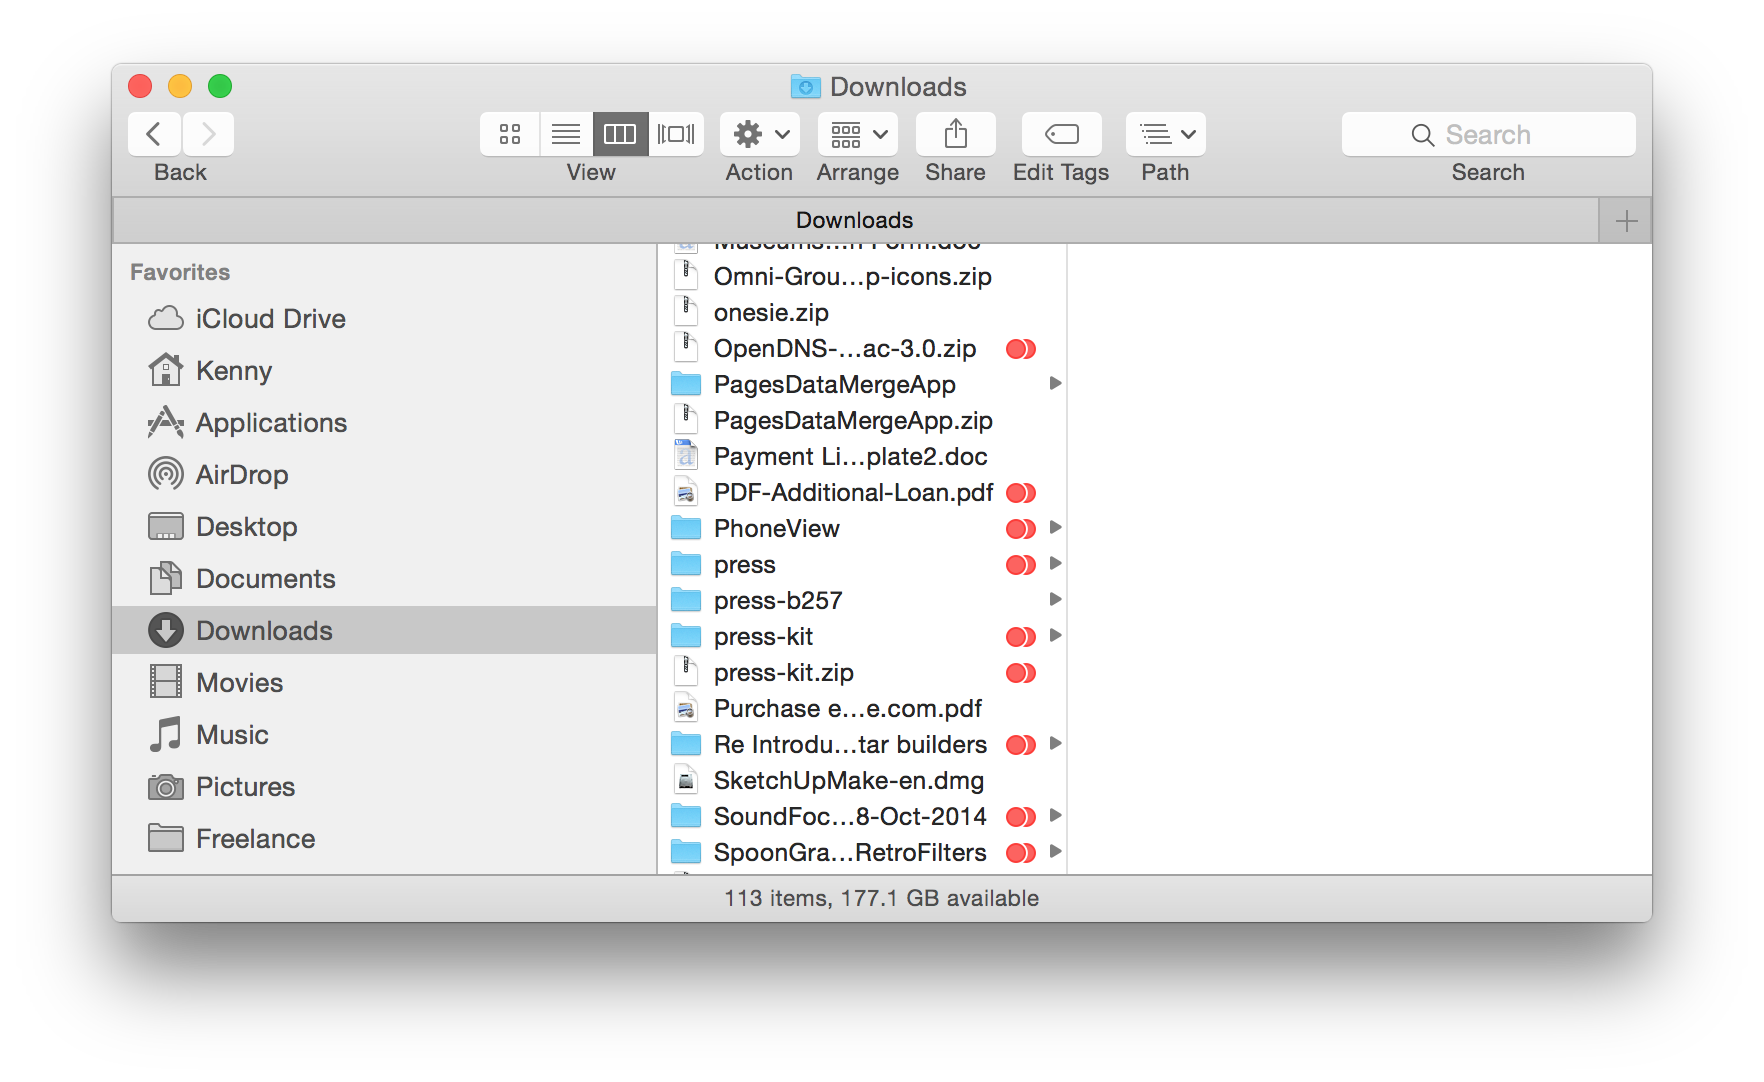 delte disk space for mac